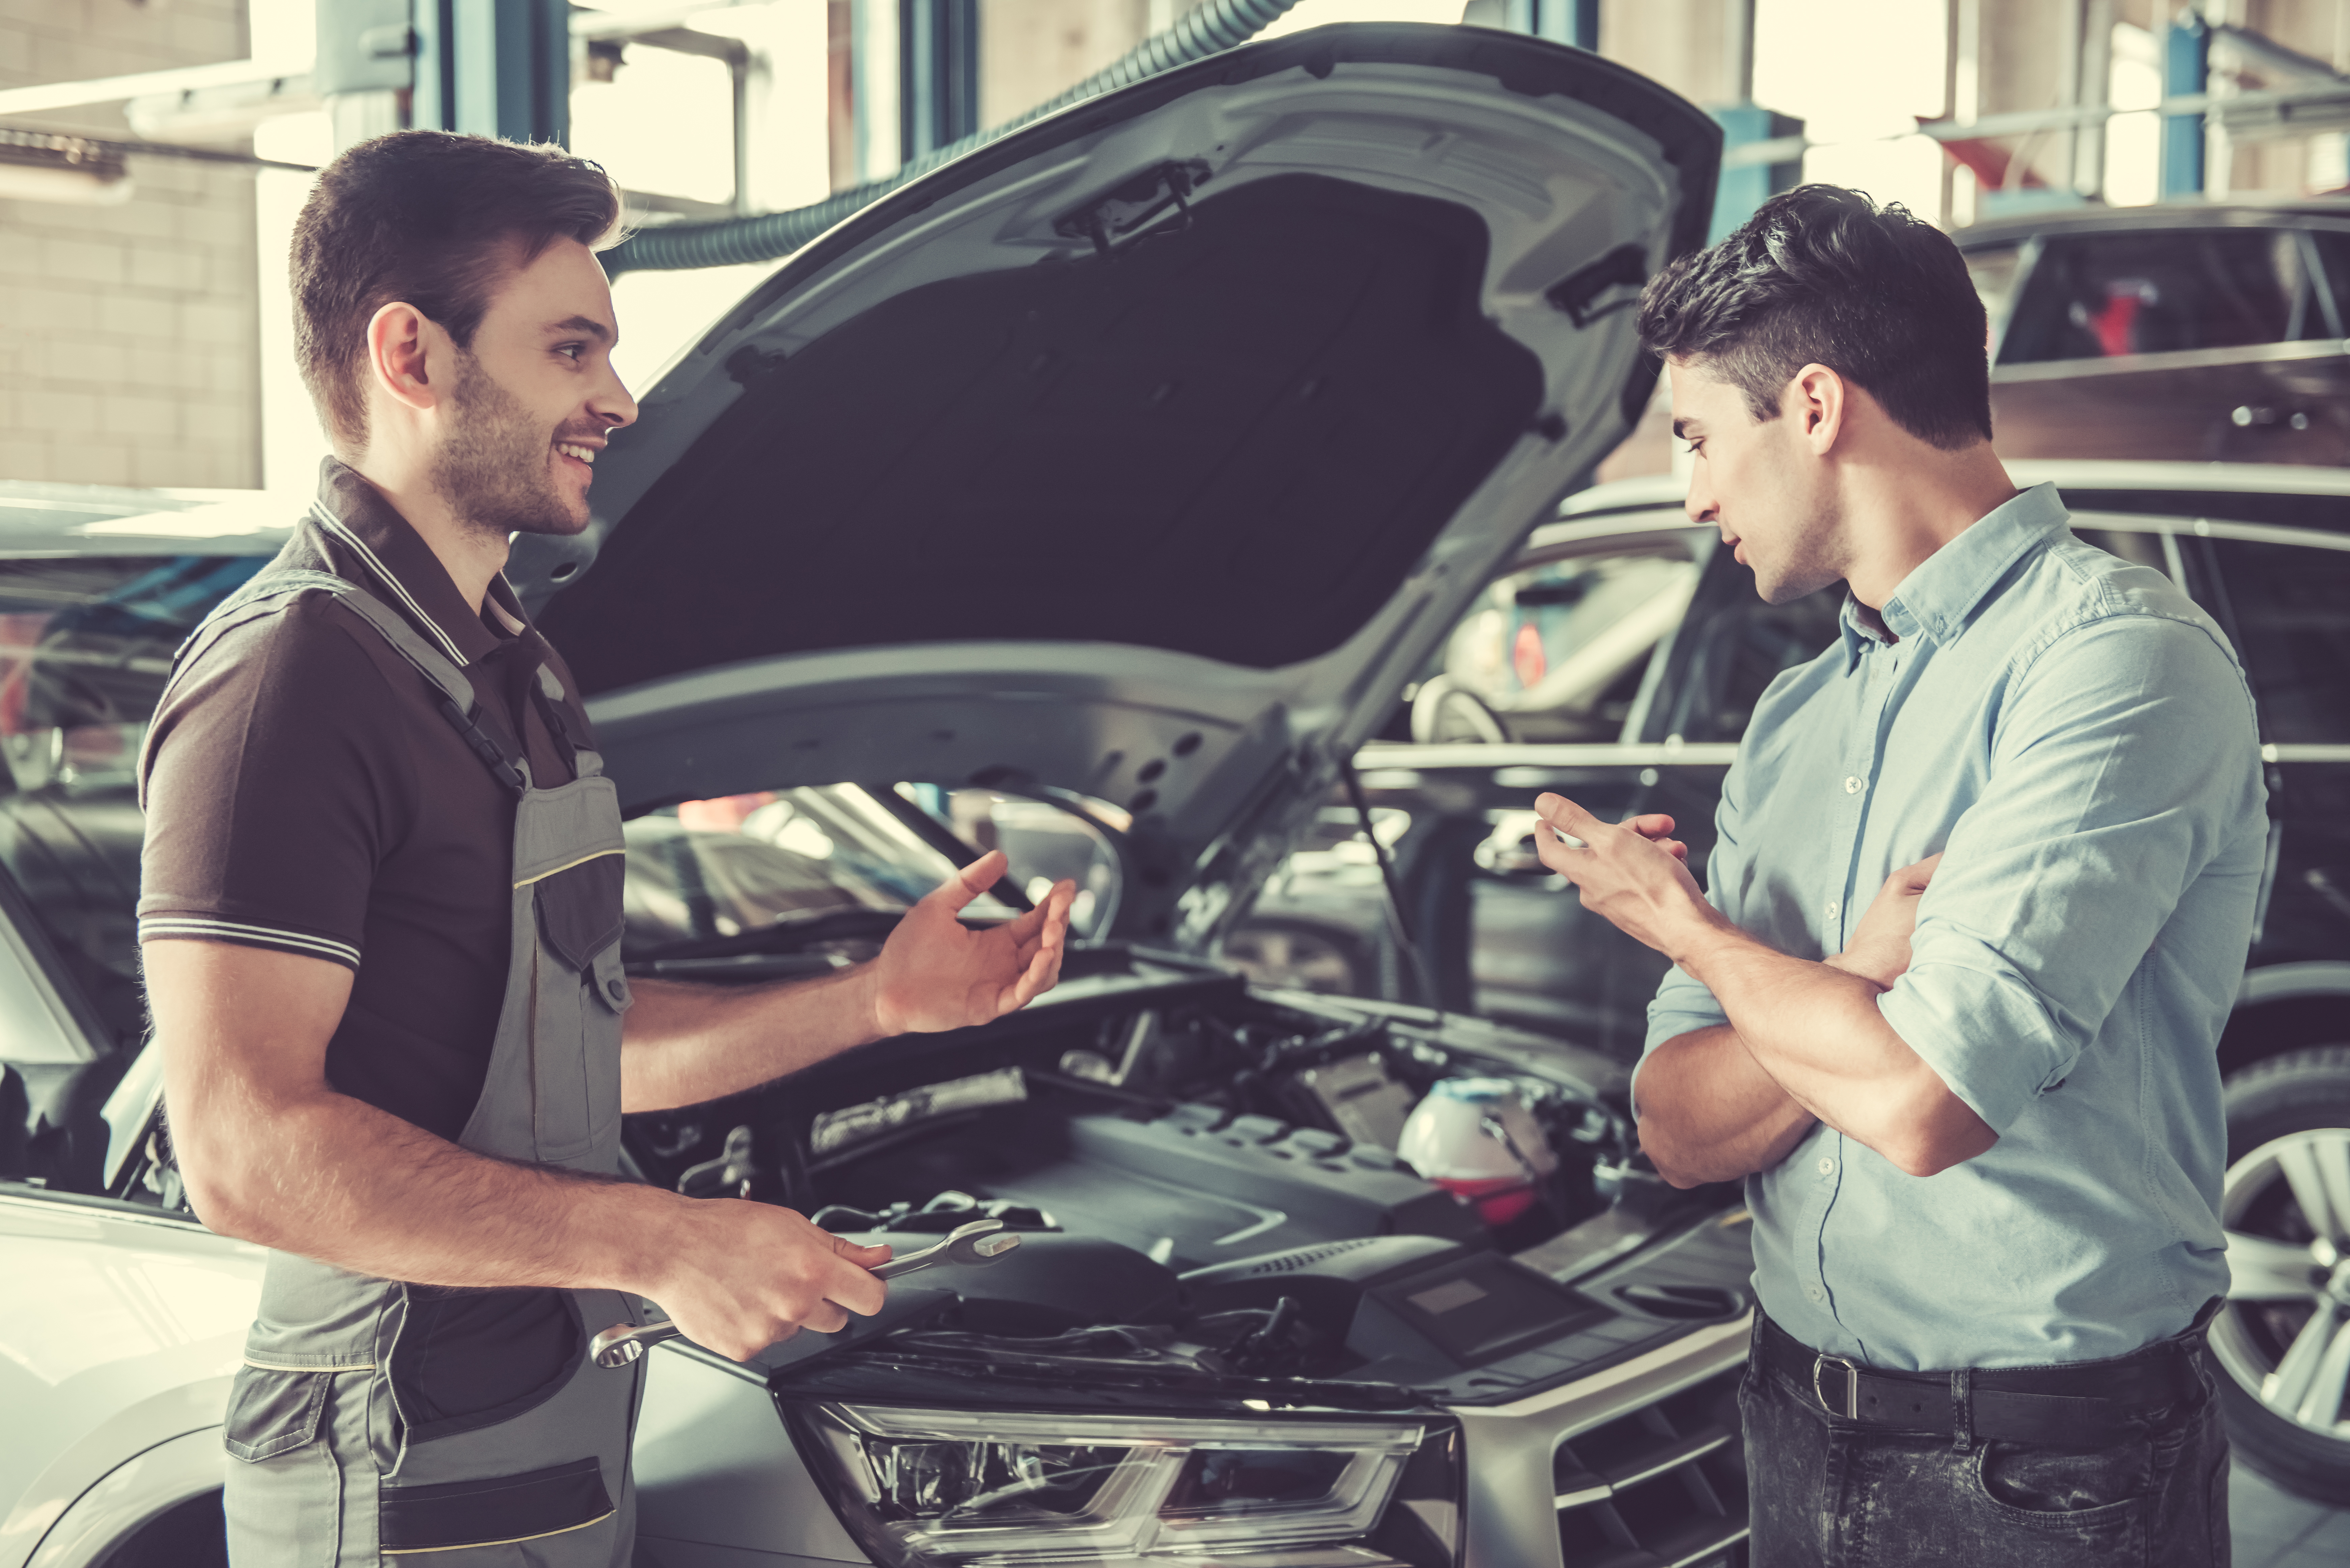 At the auto service. Handsome young auto mechanic in uniform is talking with a client and smiling. | Source: Shutterstock